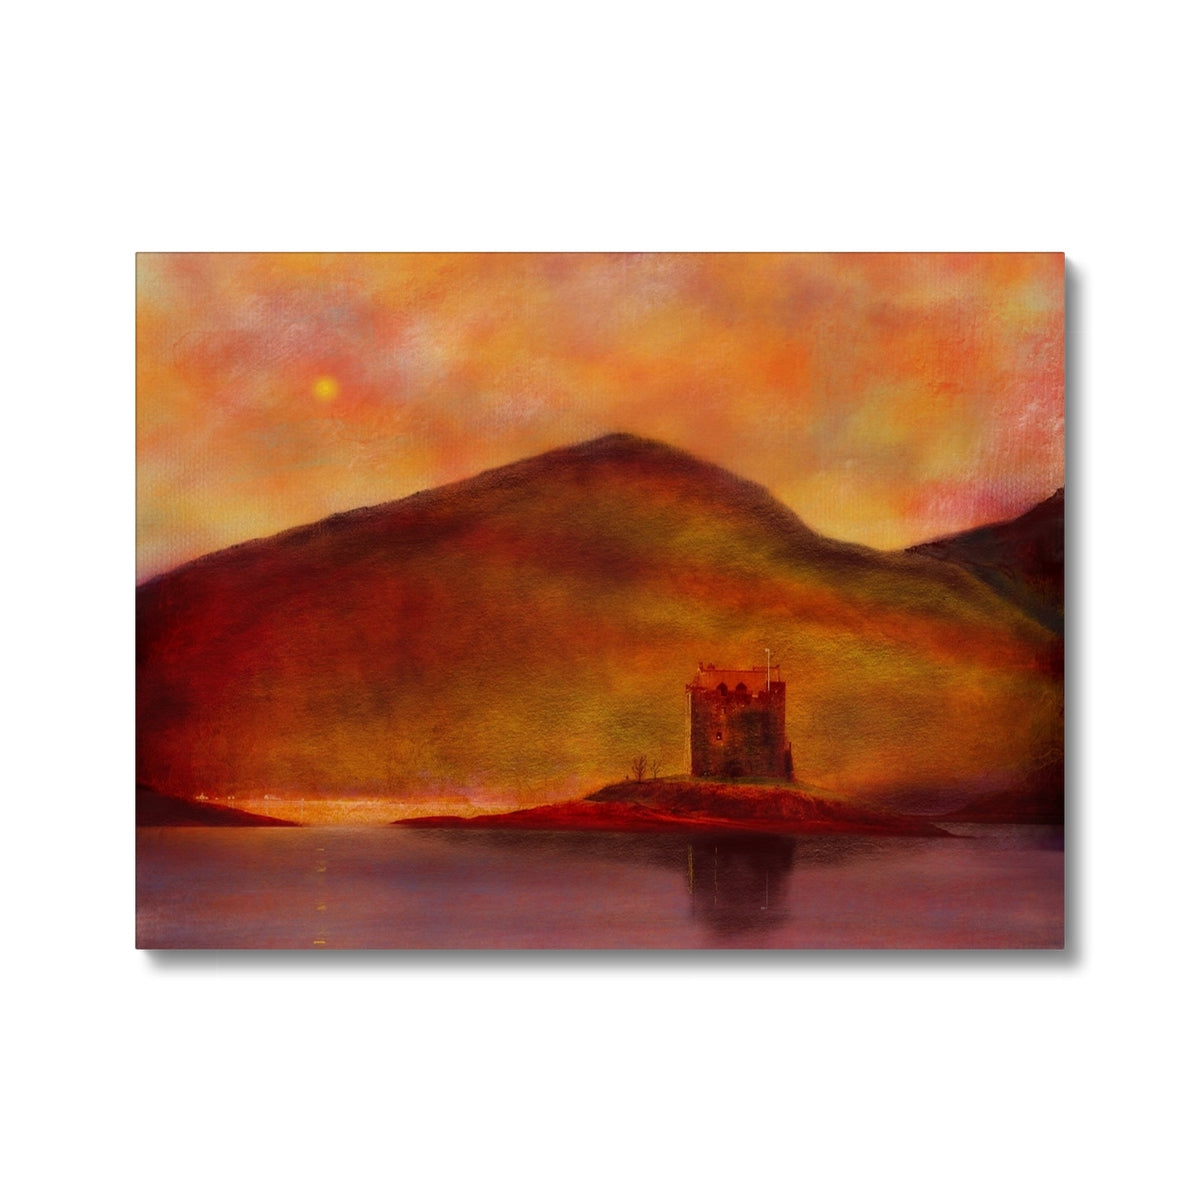 Castle Stalker Sunset Painting | Canvas From Scotland-Contemporary Stretched Canvas Prints-Historic & Iconic Scotland Art Gallery-24"x18"-Paintings, Prints, Homeware, Art Gifts From Scotland By Scottish Artist Kevin Hunter